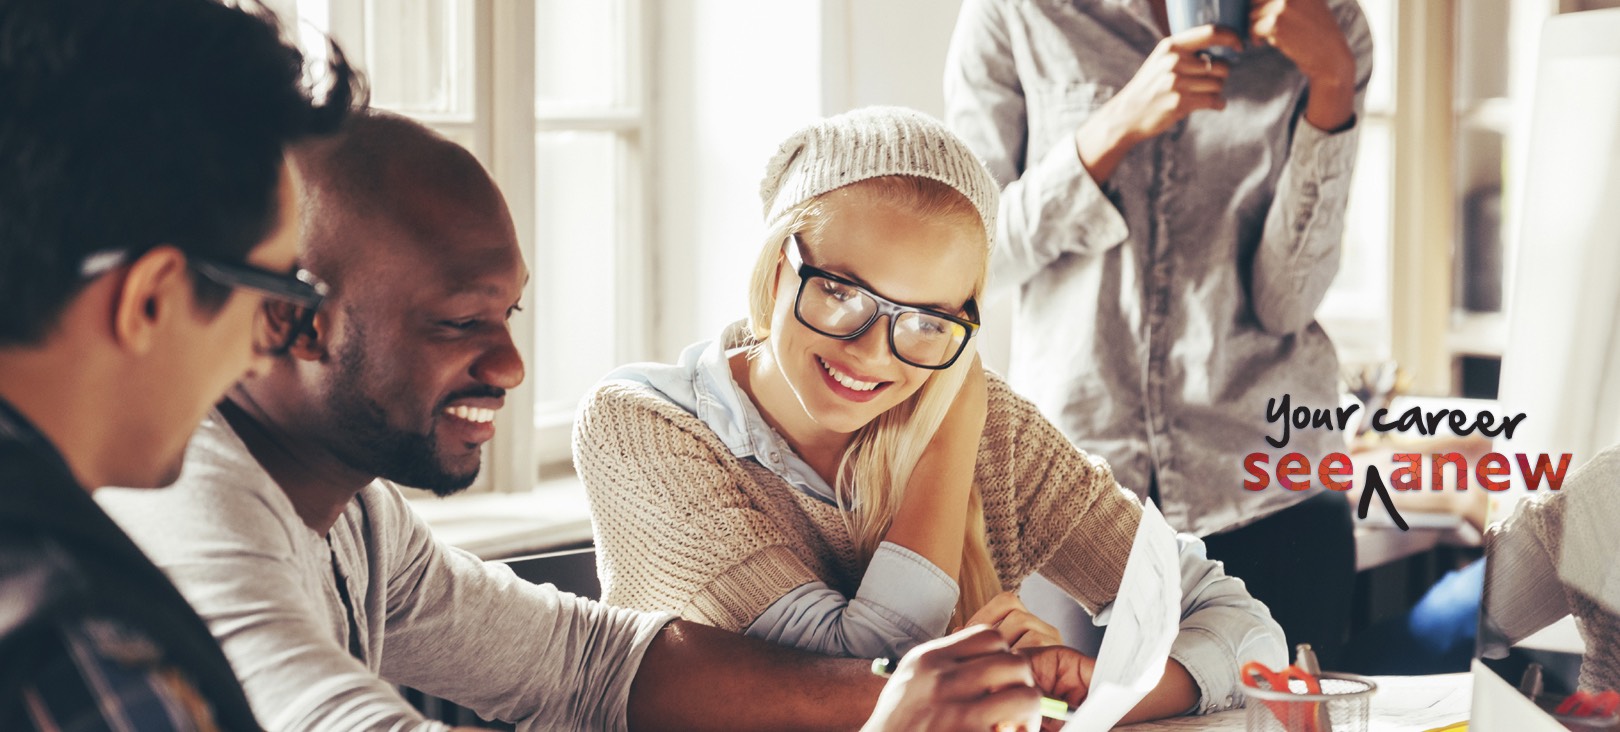 Graduate Degree: Business and Leadership (MBA, M.A.) A woman wearing beanie and glasses sitting next to an african american man looking at a paper.jpg